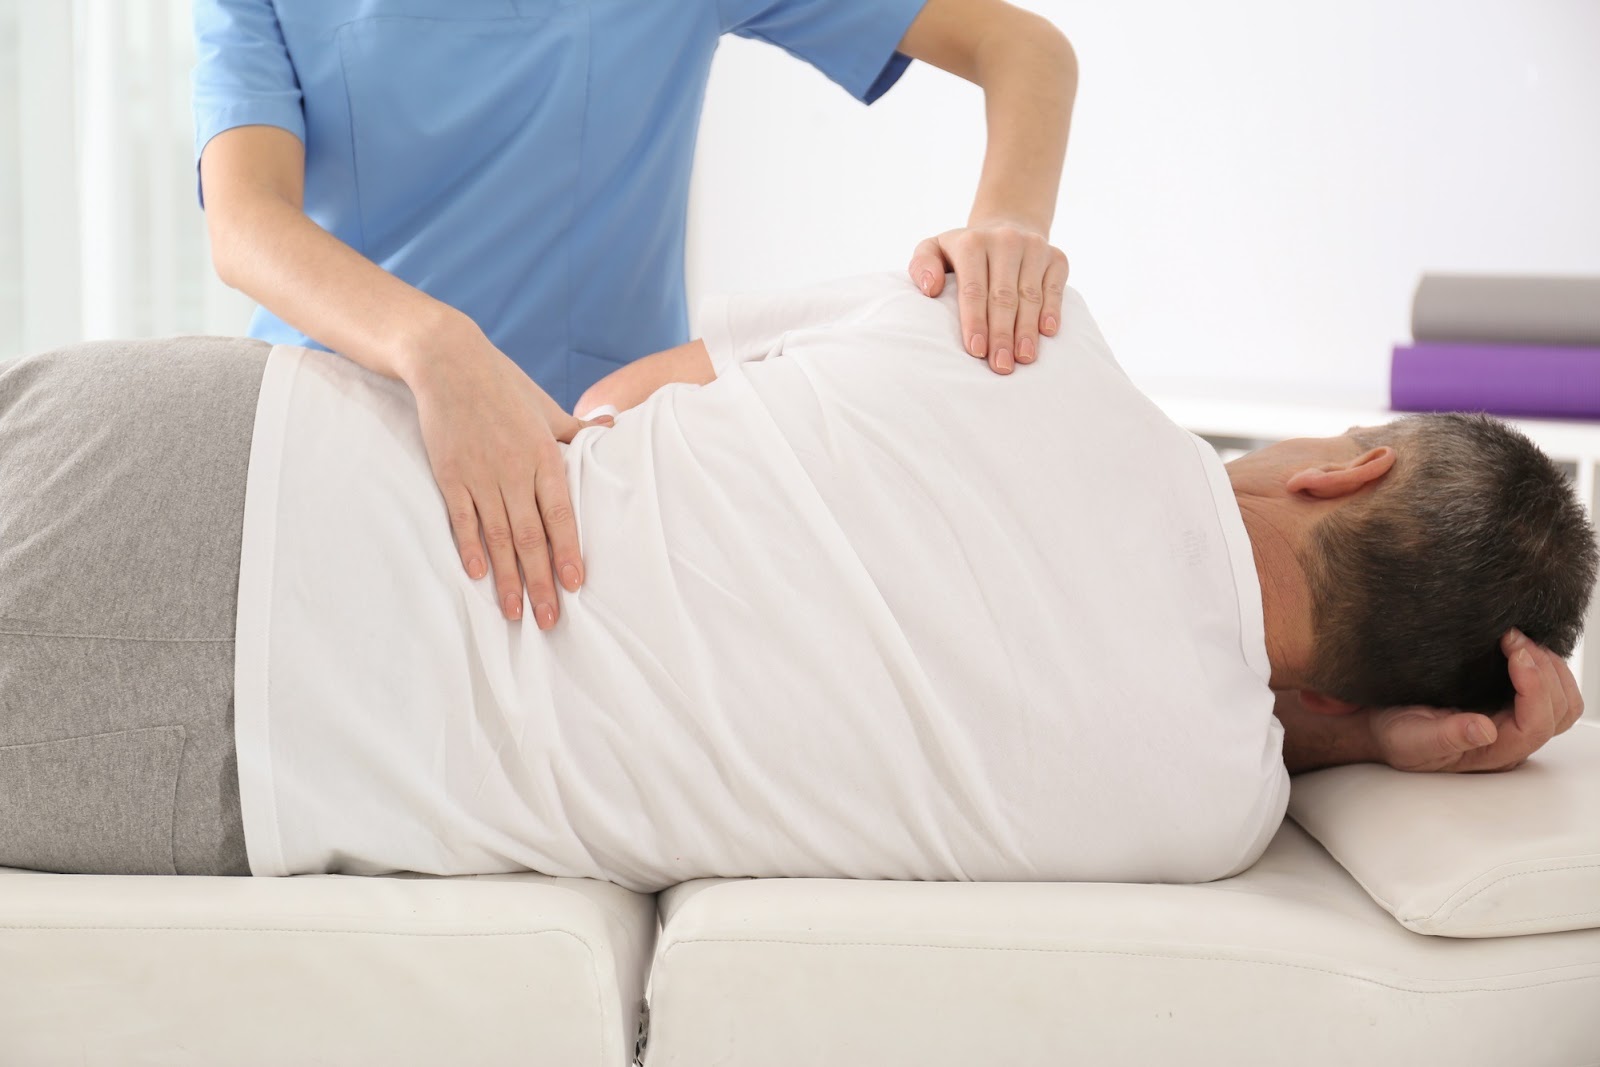 Finding the Culminate Physiotherapy Services in Brampton: Promoting Health & Wellness